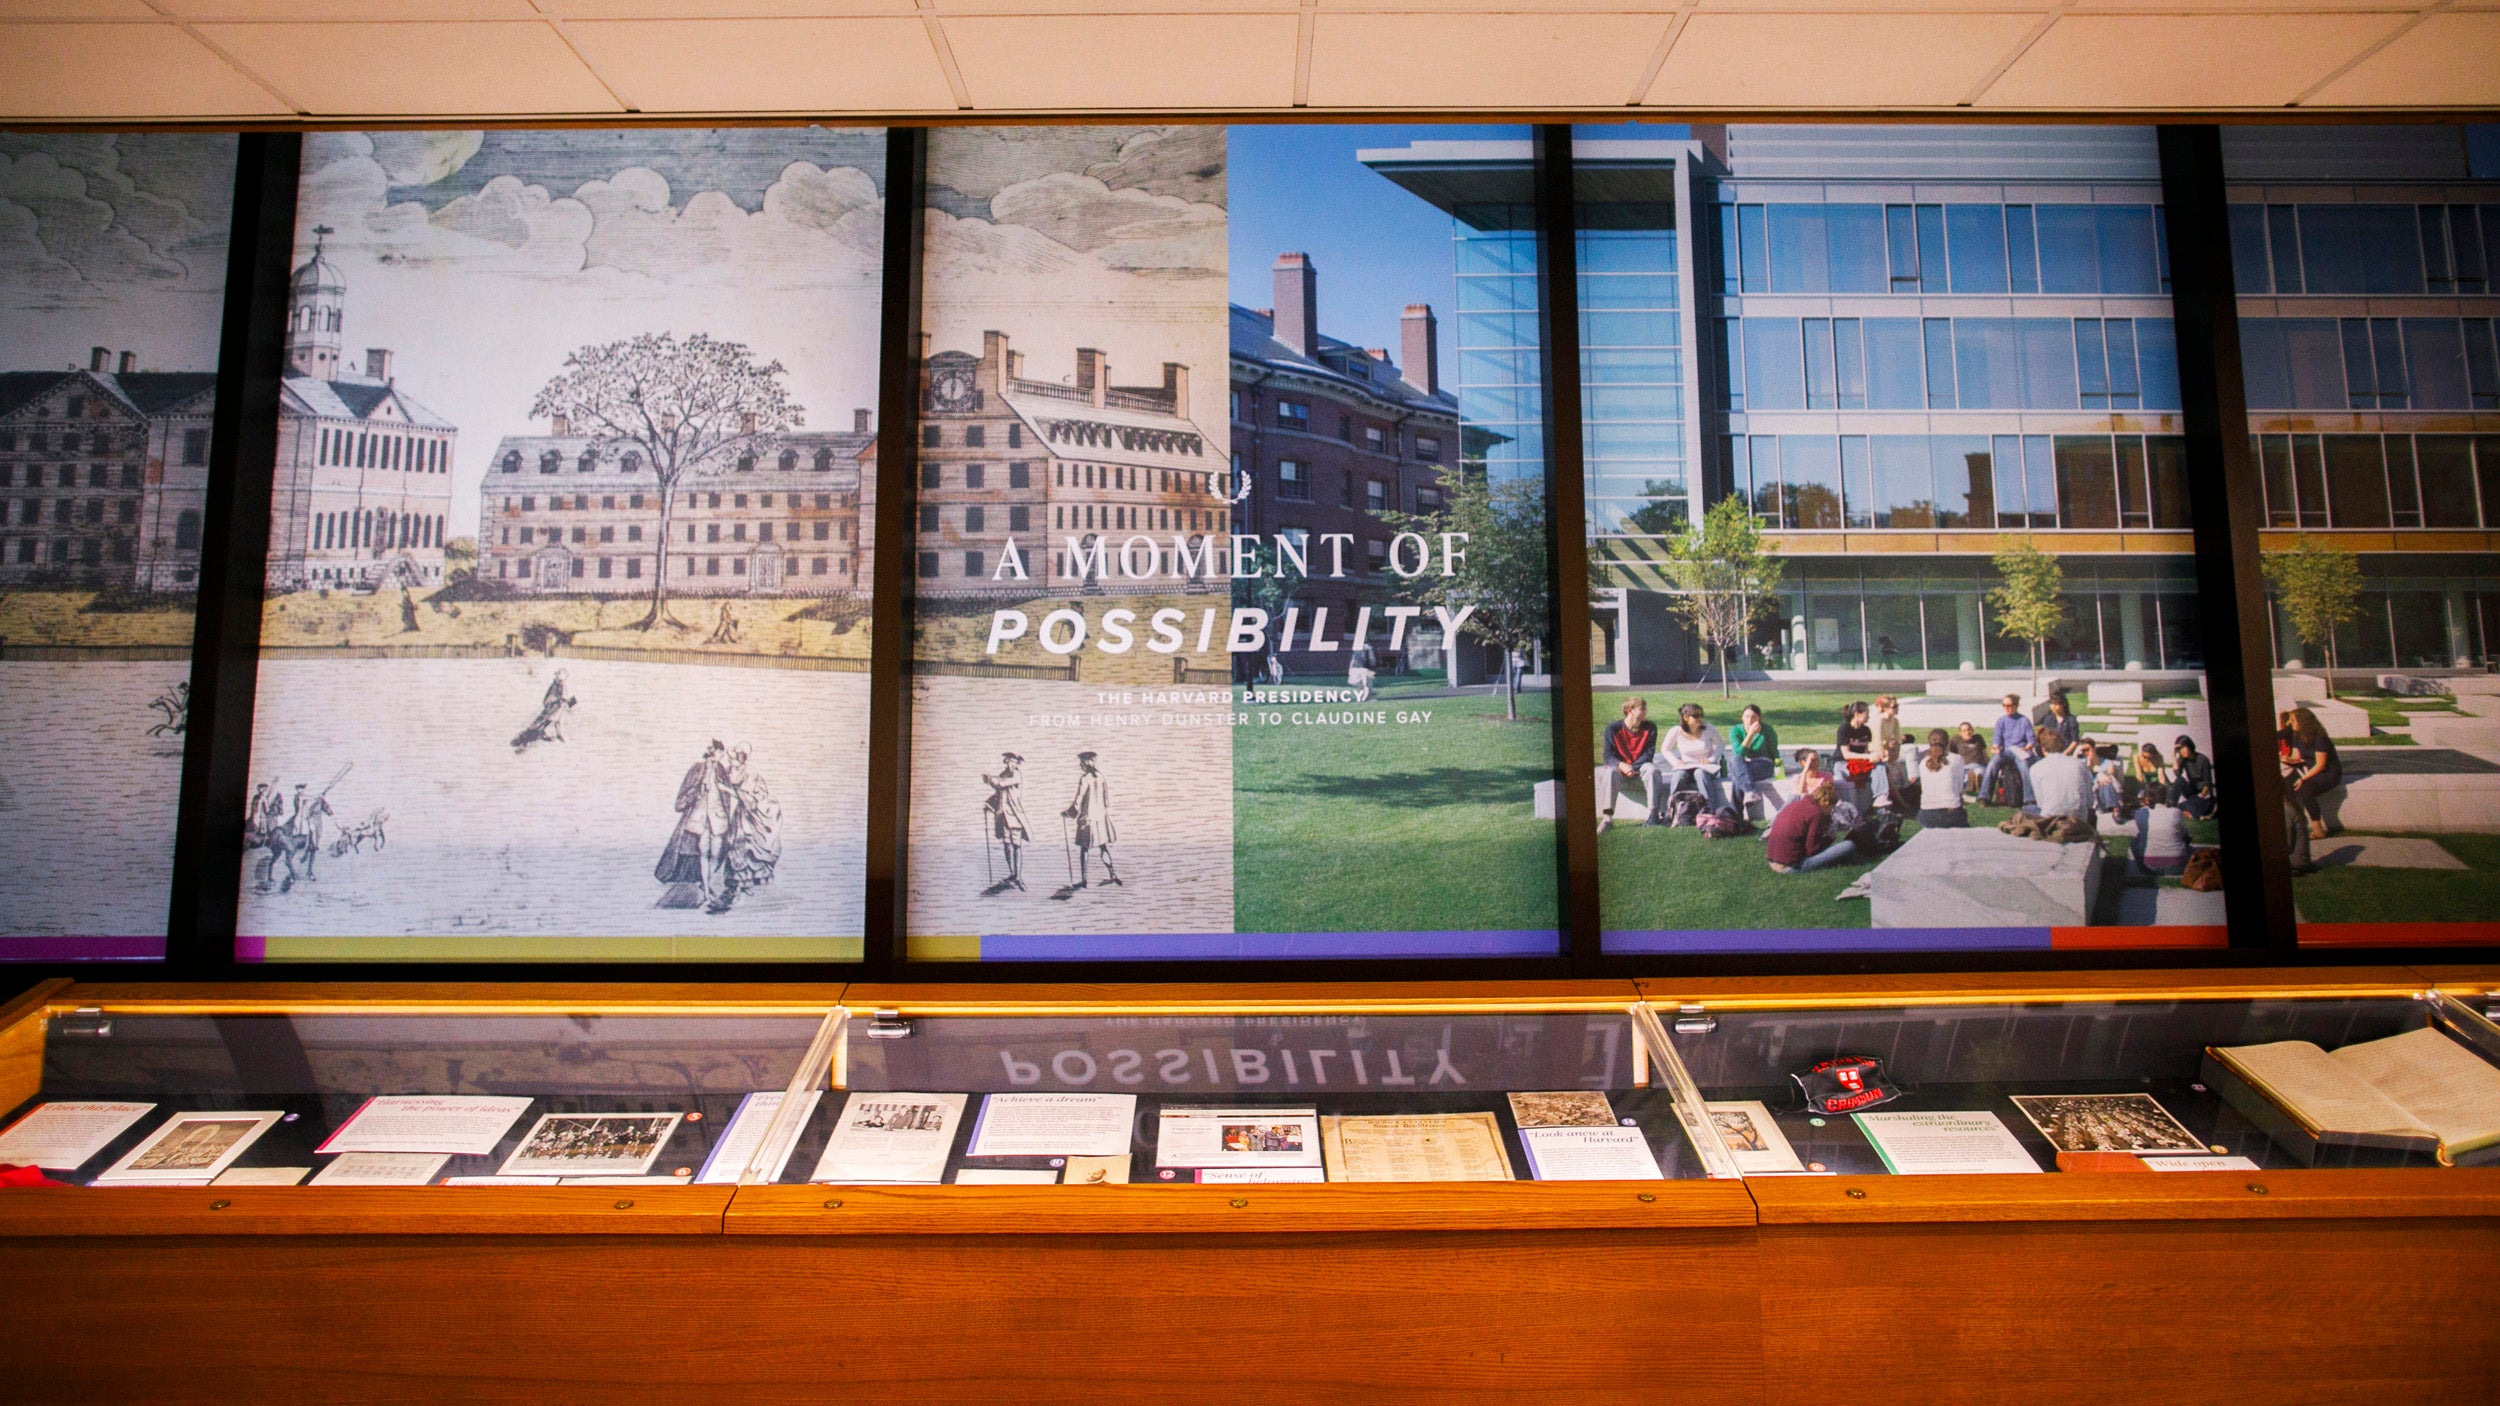 Main wall and glass case of an exhibition of historical items related to Harvard's presidency.